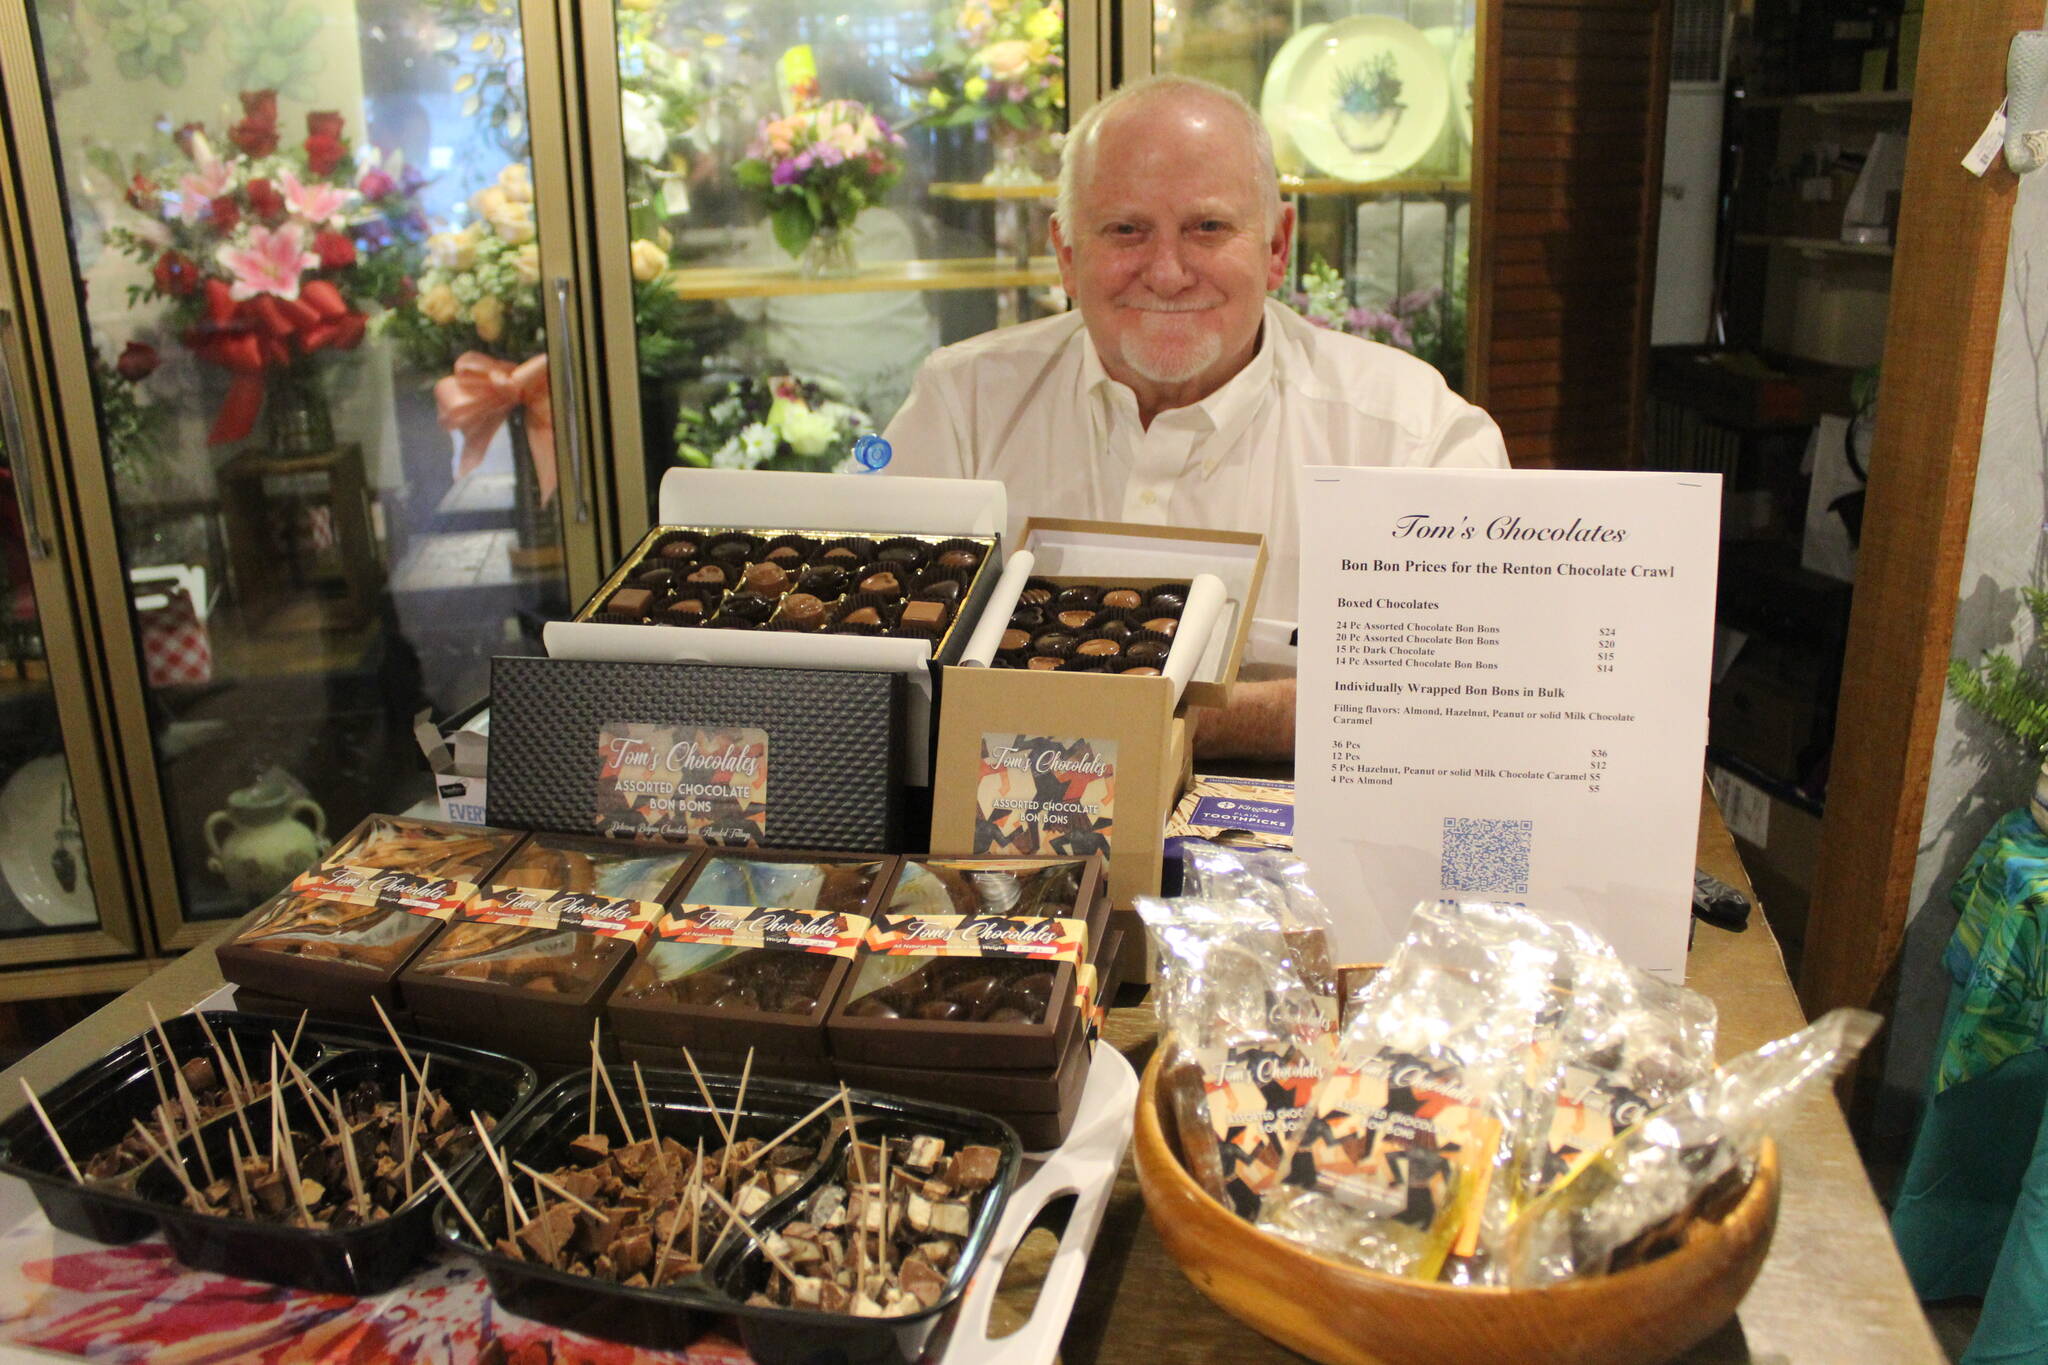 Tom of Tom’s Chocolates at Cugini Florists, the first stop of the Chocolate Crawl. Photo by Bailey Jo Josie/Sound Publishing.